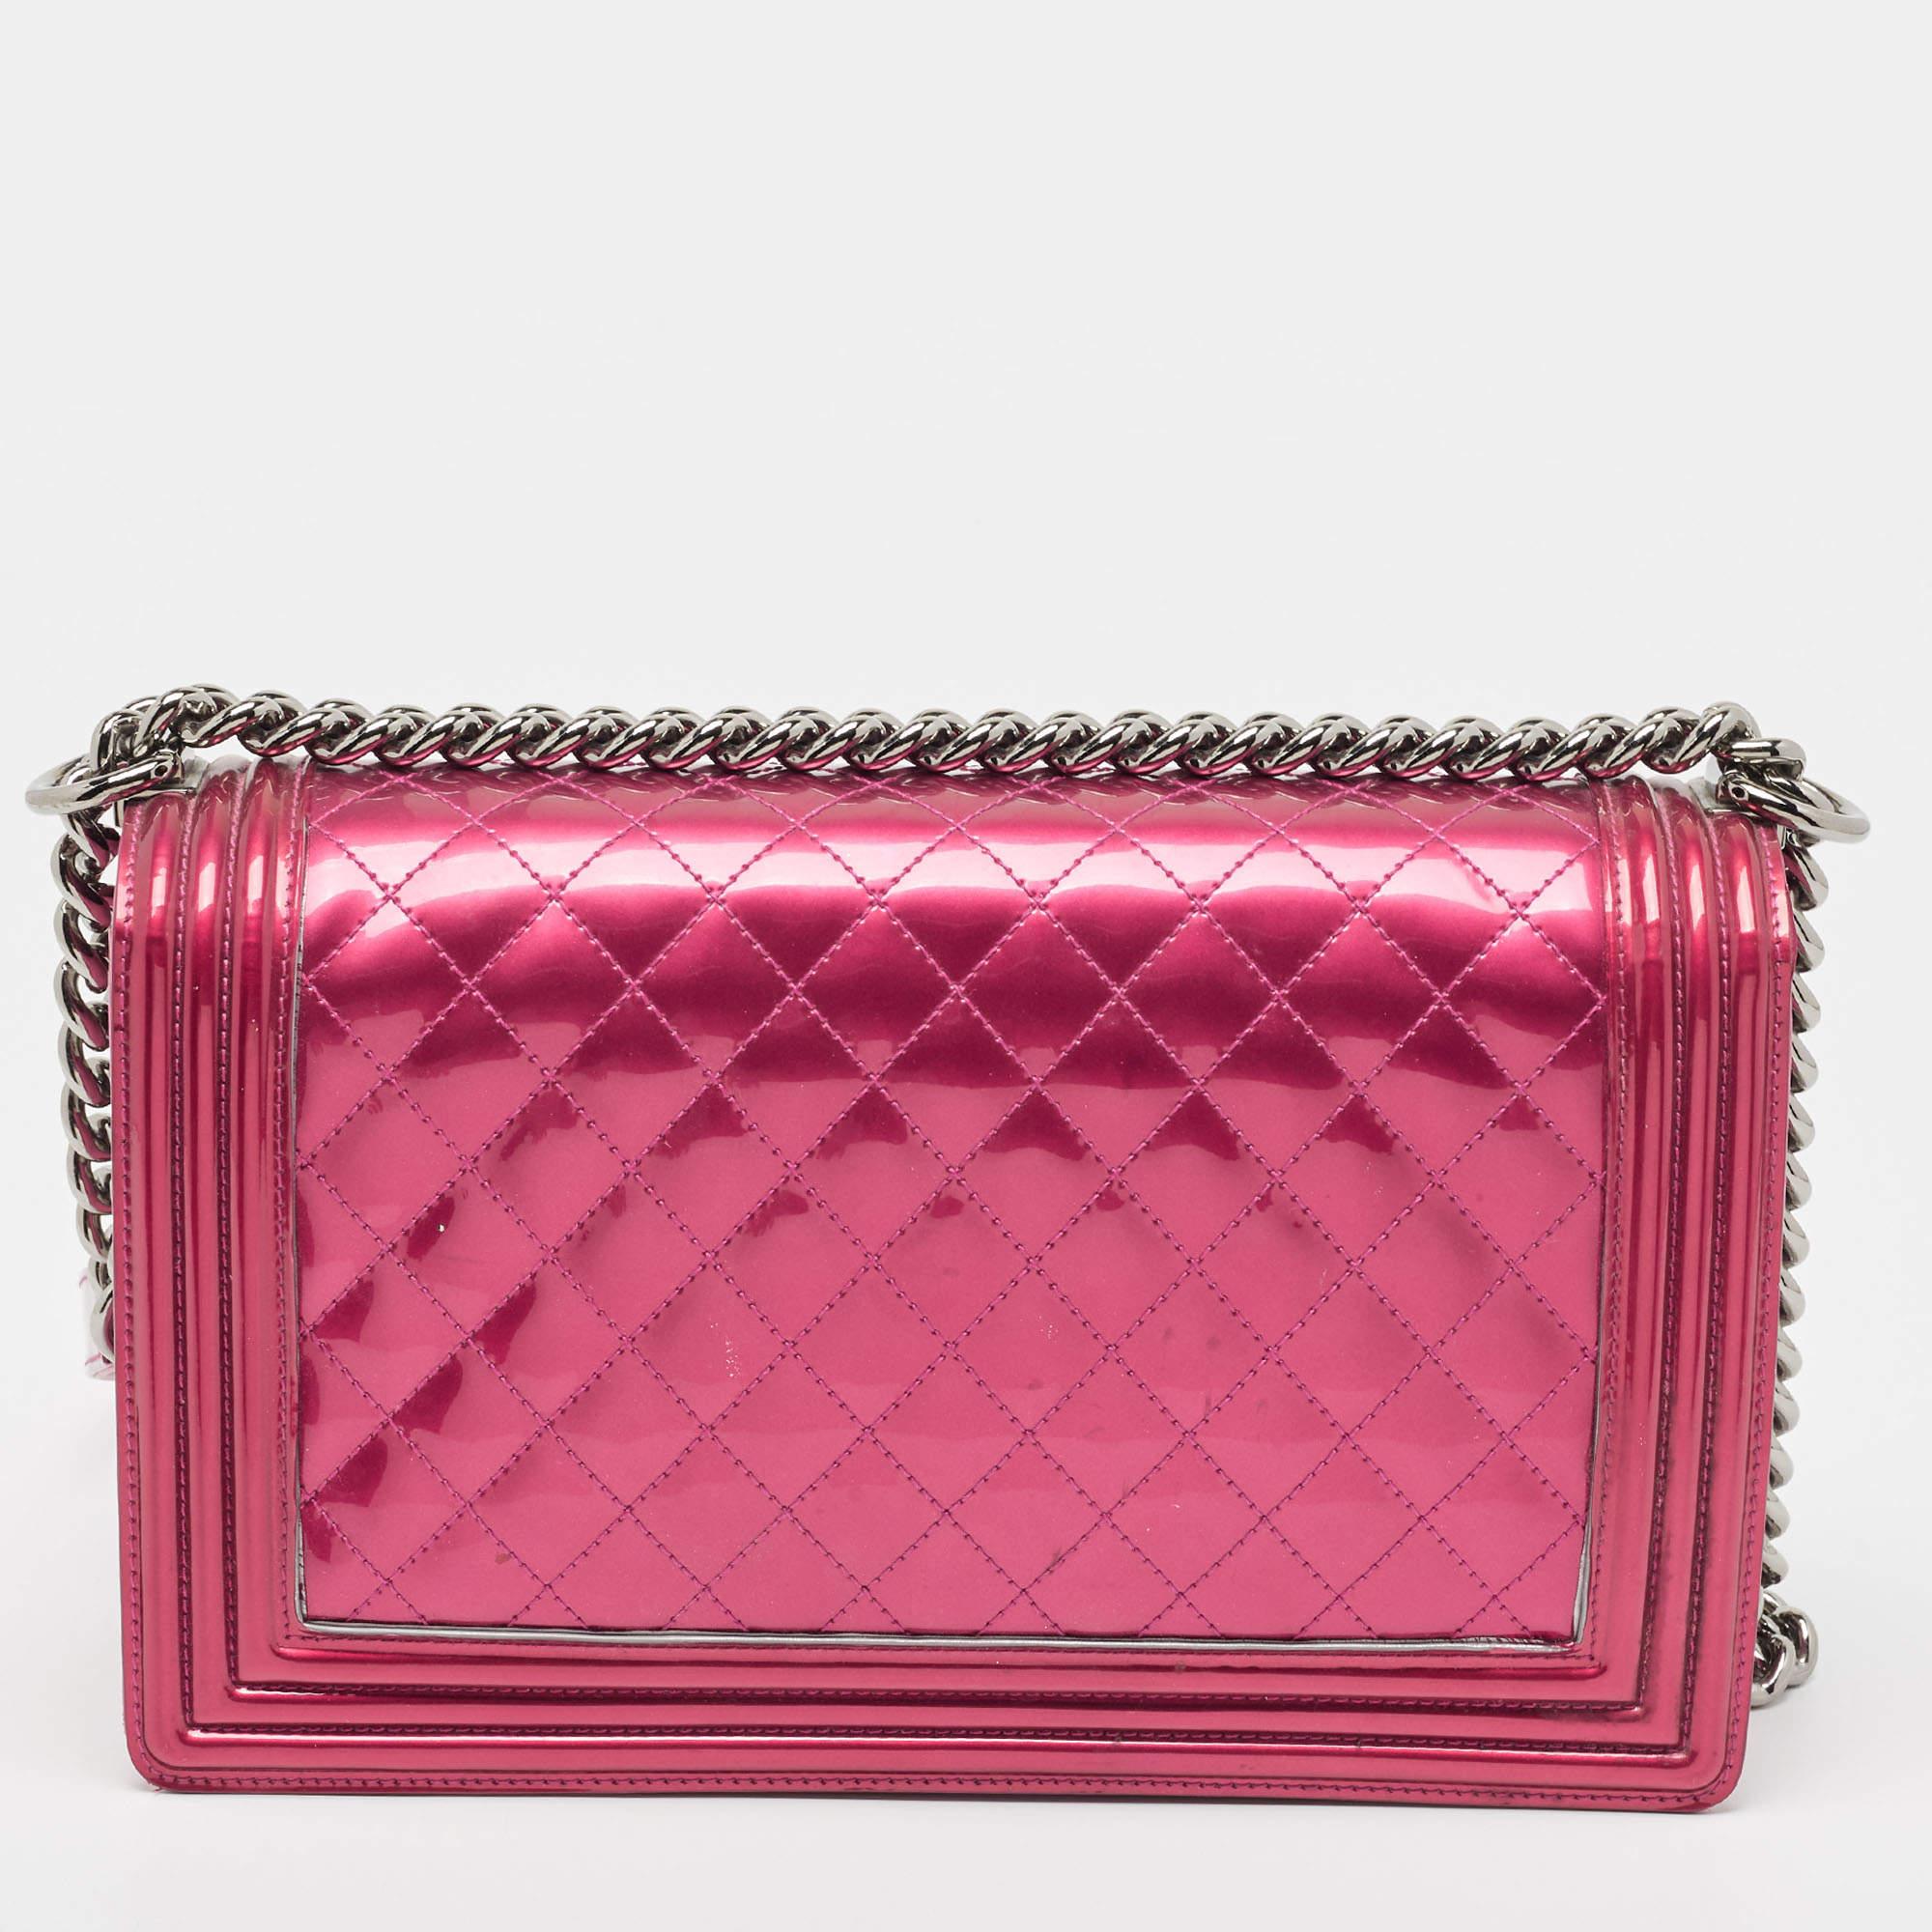 Introduced as a part of the Chanel Fall/Winter collection of 2011, the Boy flap bag embodies an alluring appeal and is complemented with exquisite details. This pink creation is meticulously crafted from quilted patent leather and features side